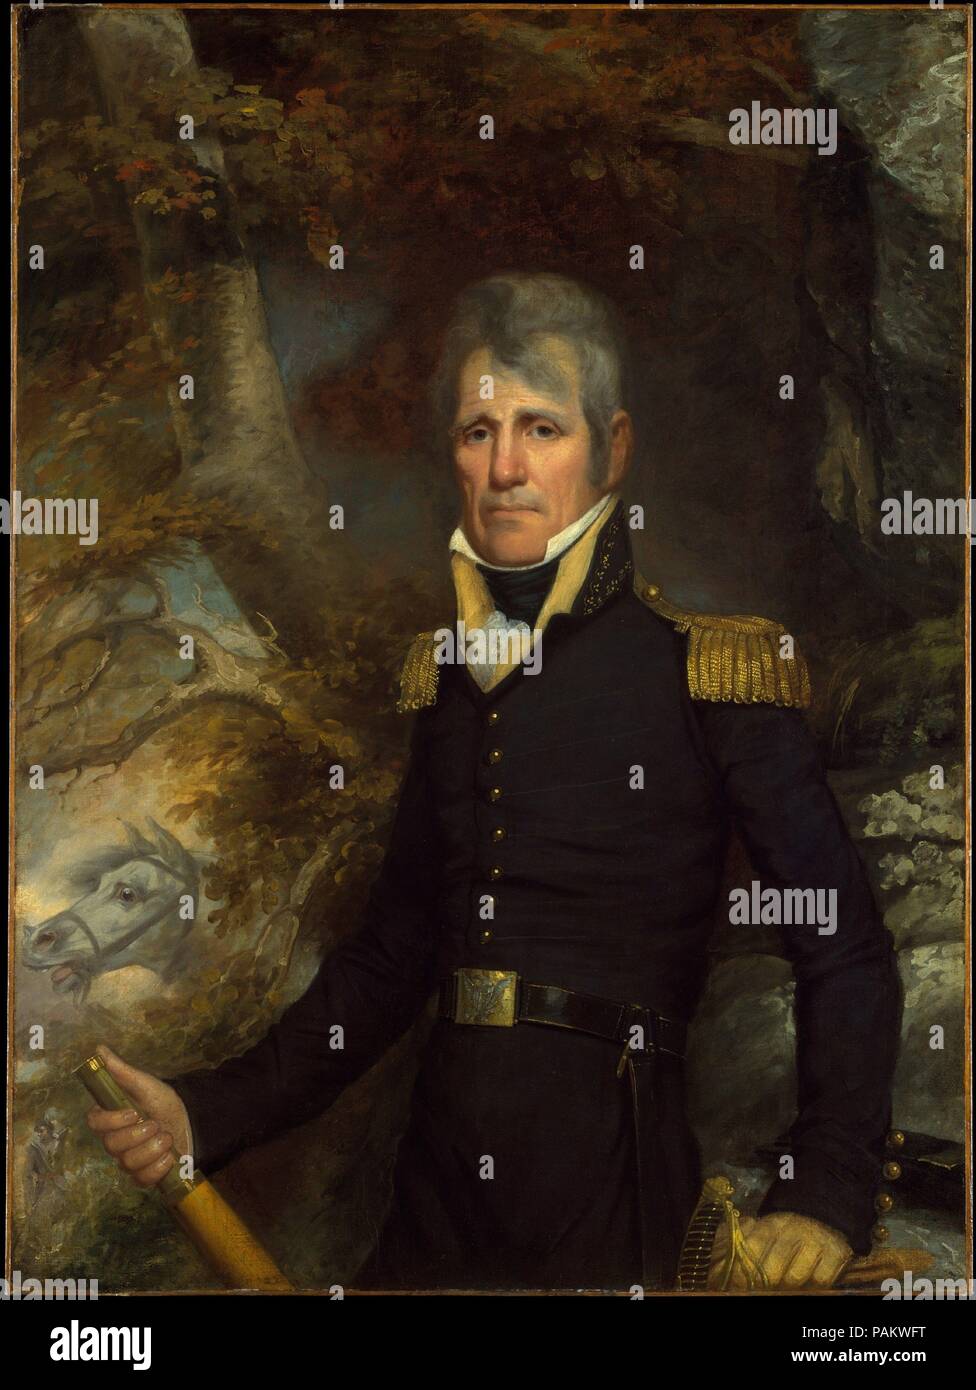 General Andrew Jackson. Artist: John Wesley Jarvis (American (born England), South Shield 1780-1840 New York). Dimensions: 48 1/2 x 36 in. (123.2 x 91.4 cm). Date: ca. 1819.  Before serving as seventh president of the United States (1829-37), Andrew Jackson (1767-1845) was a member of the House of Representatives, a  United States senator, a major general in the army, and the first  governor of Florida. The occasion for this formal, military portrait was his triumphal visit to New York in 1819, during which he was celebrated as the hero of the War of 1812 for his decisive victory over the Brit Stock Photo